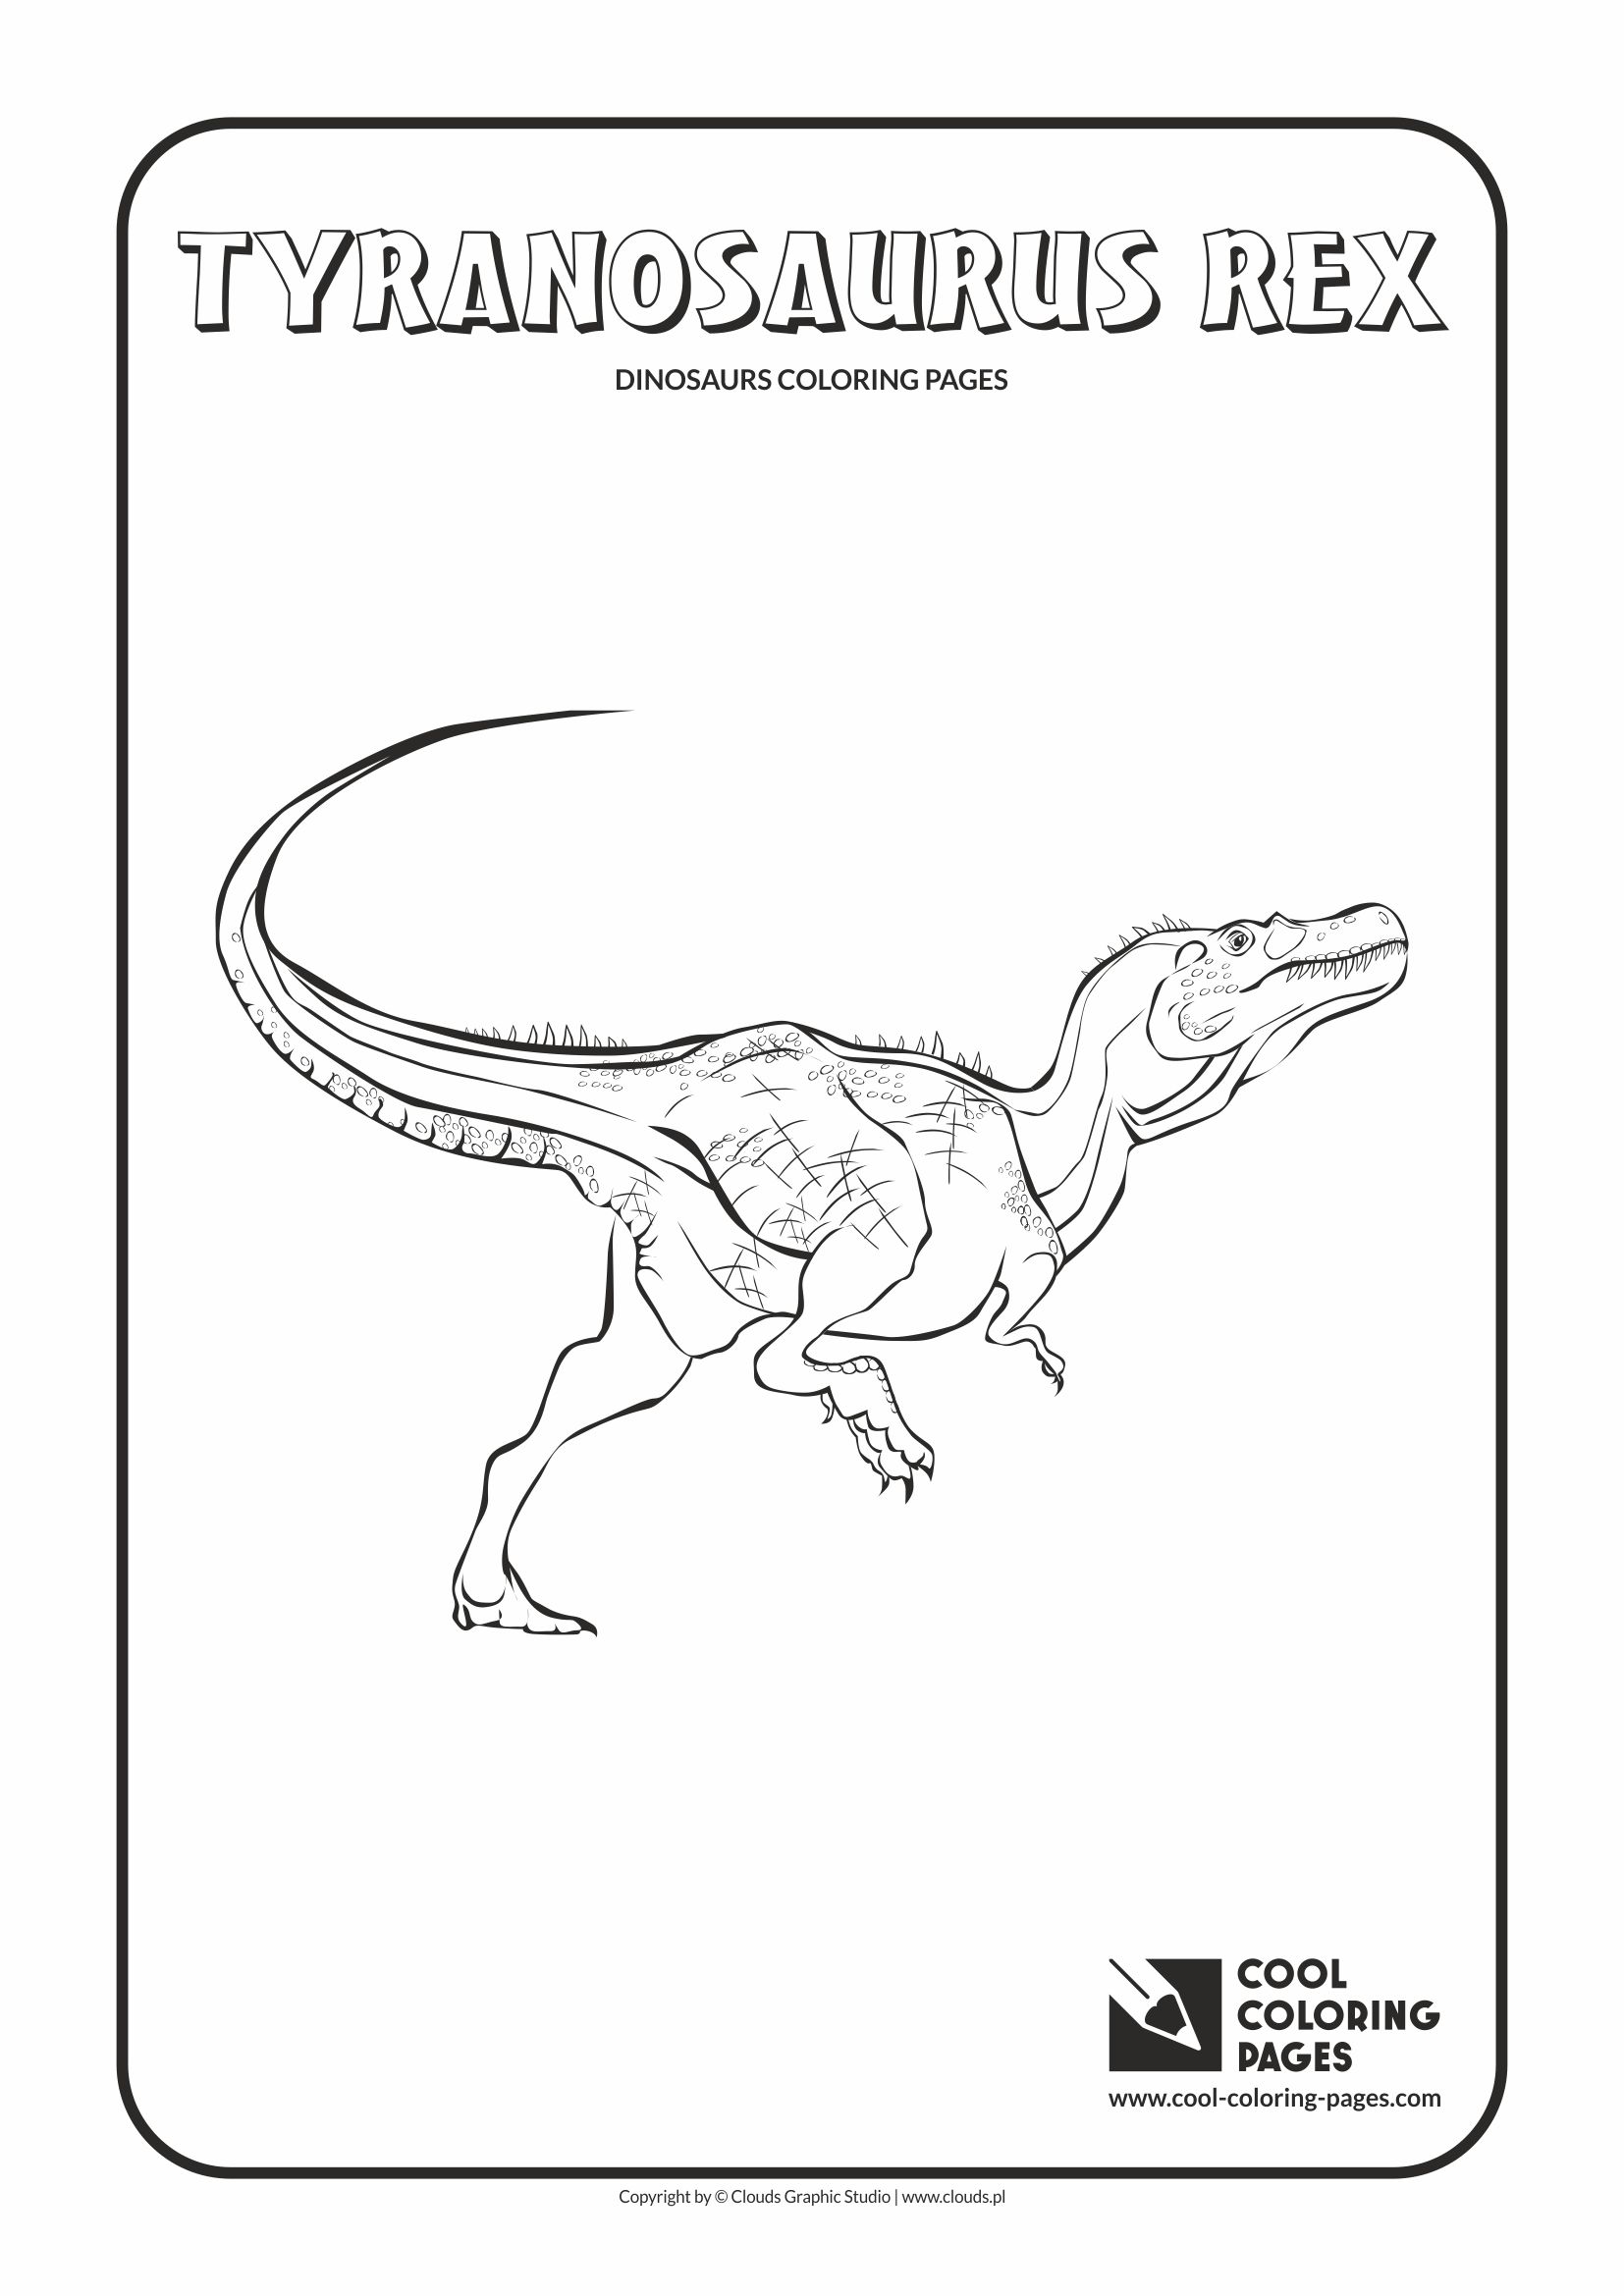 Cool Coloring Pages - Animals / Tyranosaurus rex / Coloring page with tyranosaurus rex